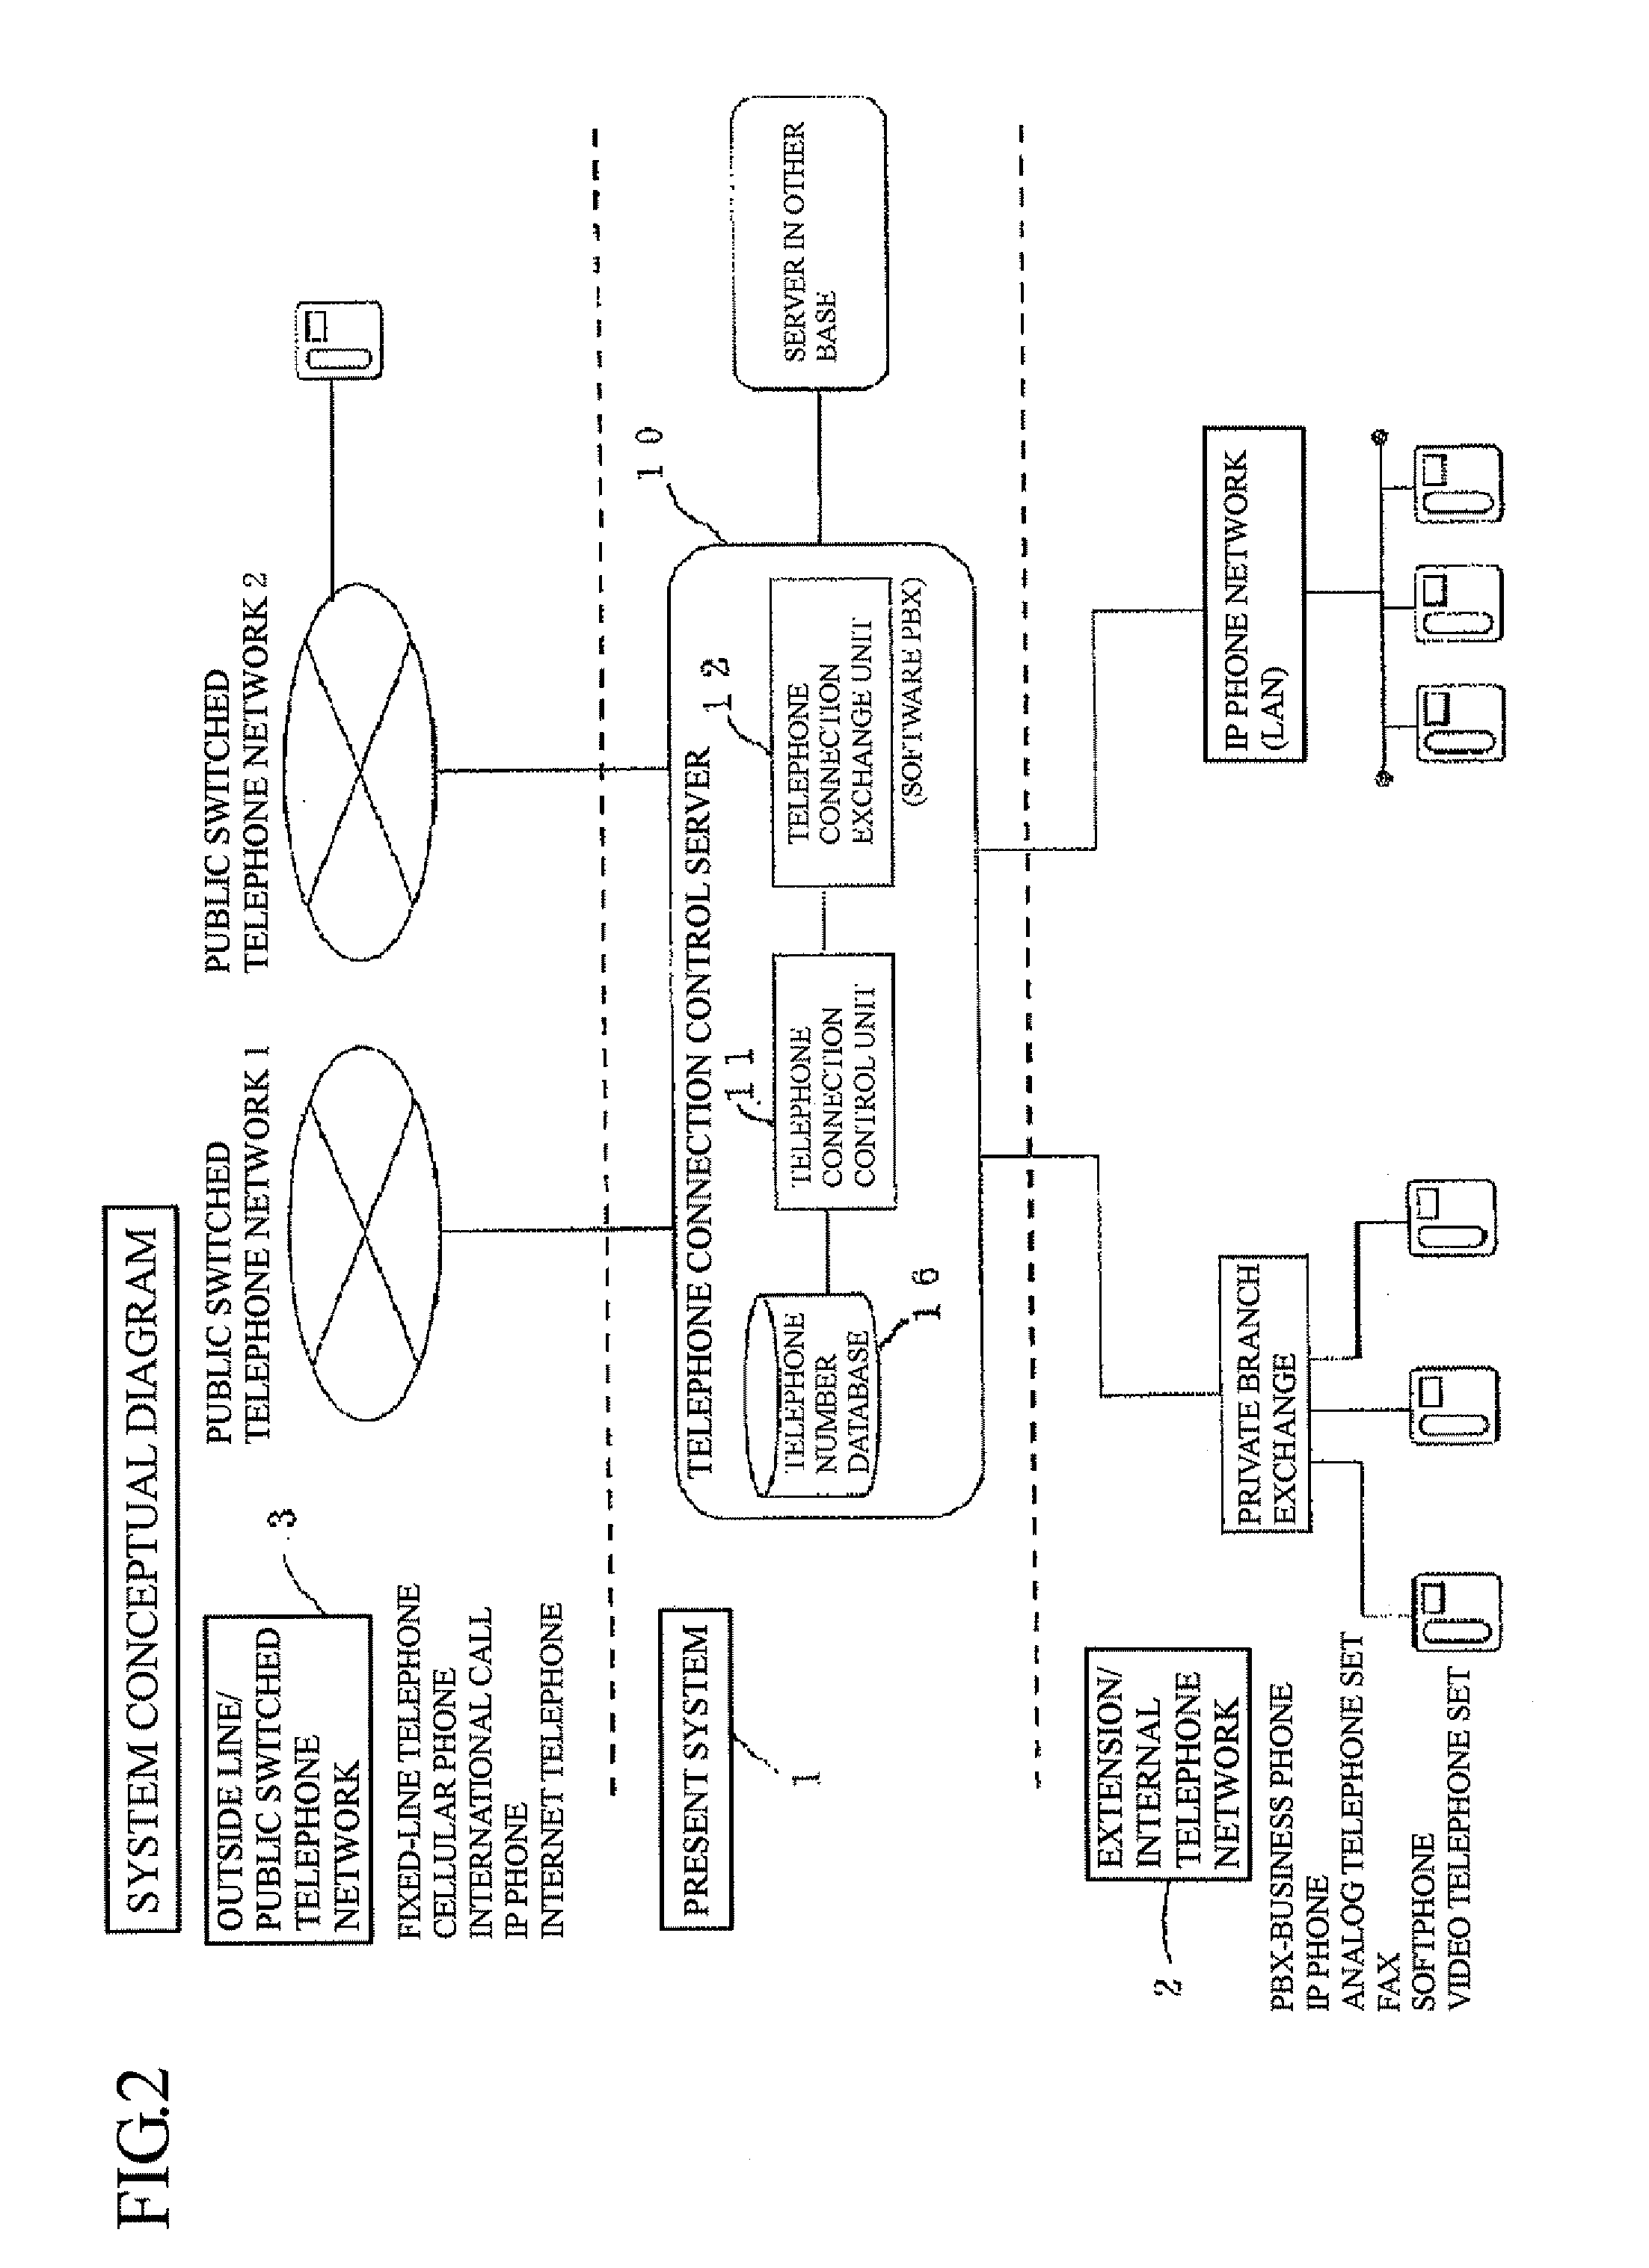 Telephone connection control method and telephone connection control system